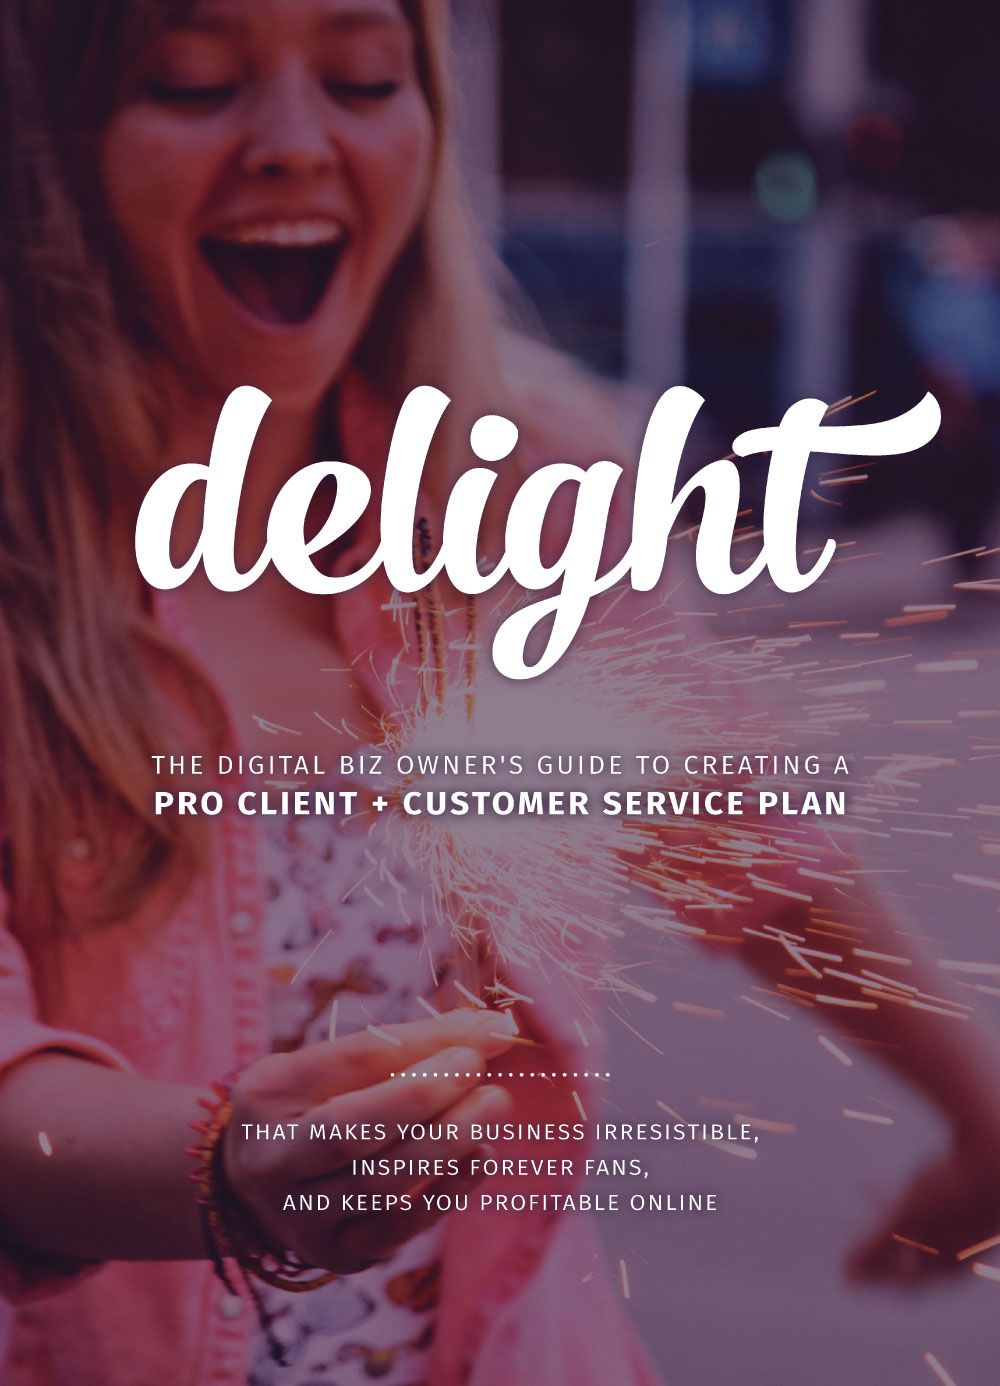 The complete guide to creating a customer service plan for your small business. Delight: The Digital Biz Owner's Guide To Creating A Pro Client + Customer Service Plan is for creative business owners, freelancers, Etsy shop owners, and entrepreneurs who want to get more clients + buyers + forever fans by delivering heroic service.